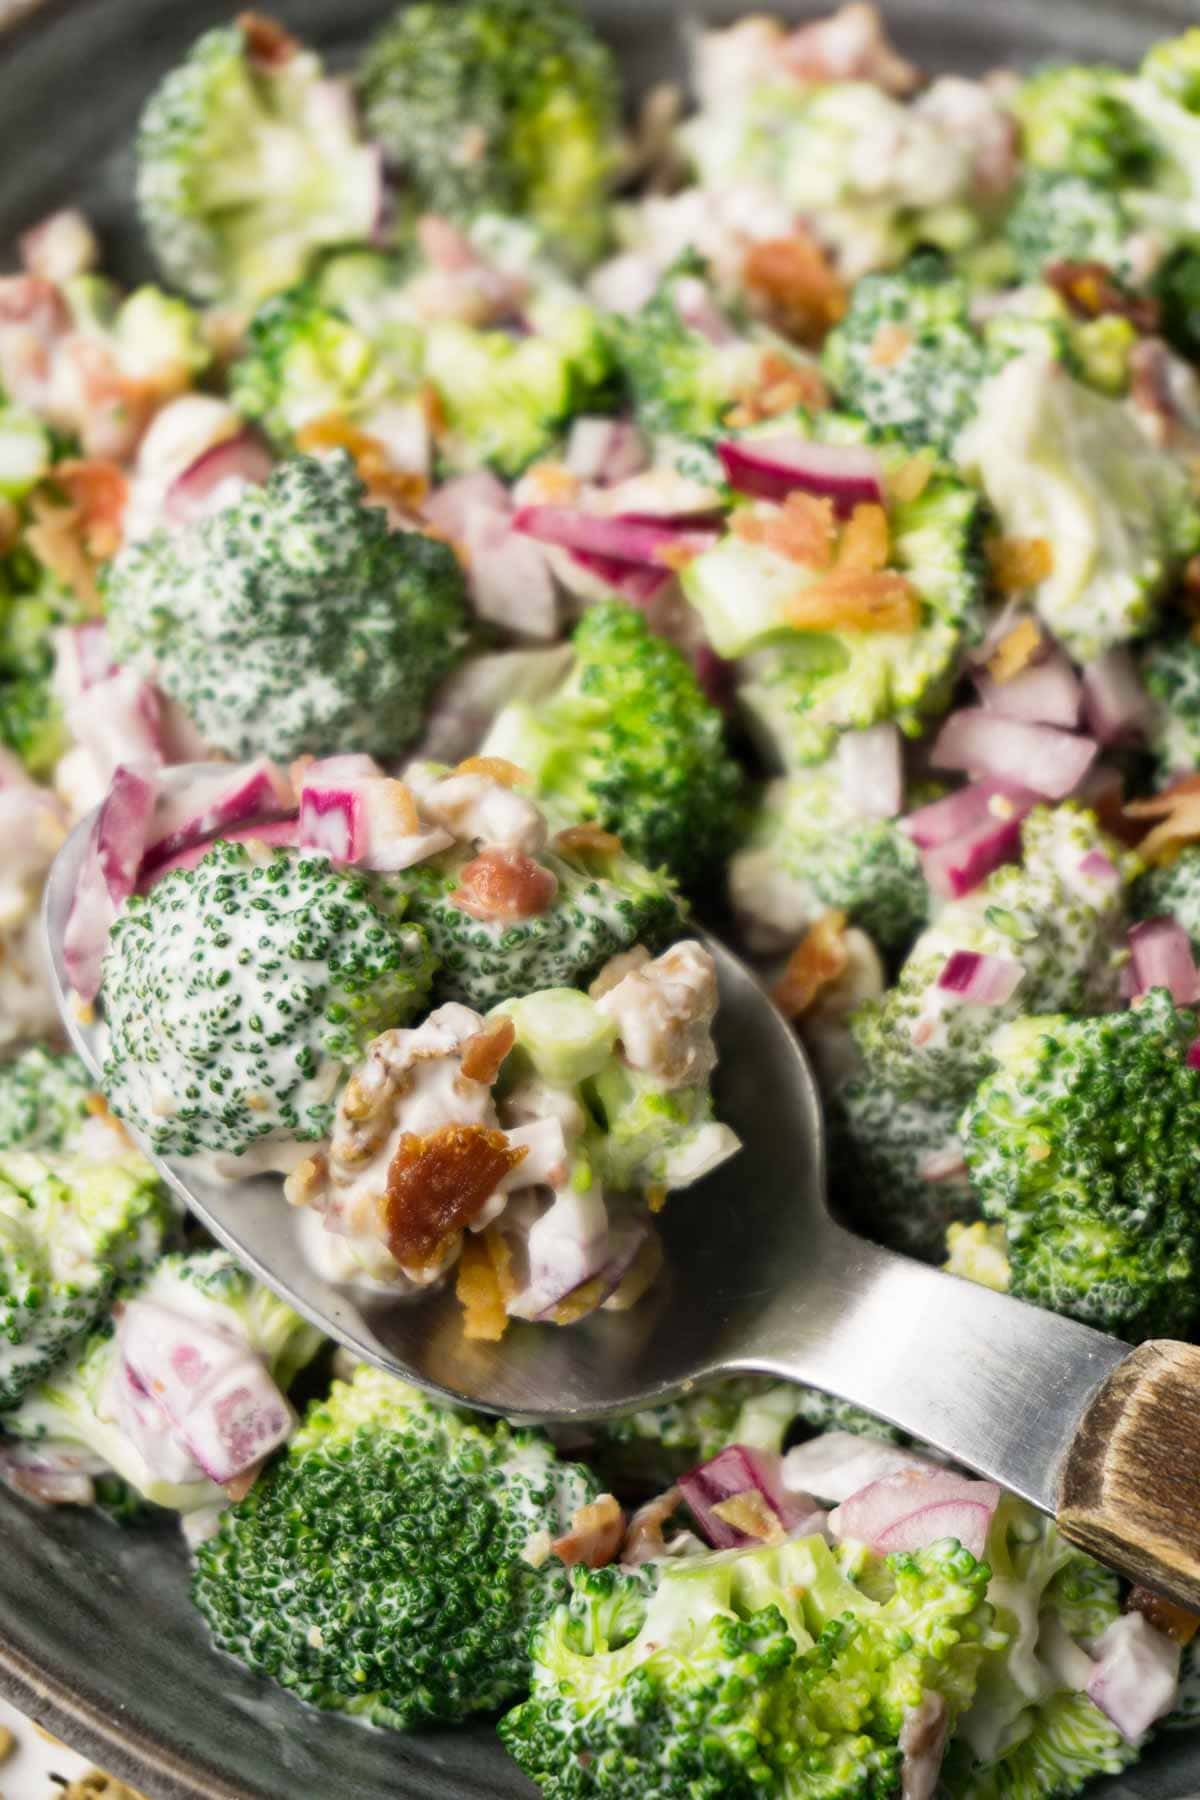 Spoon filled with broccoli with bacon and onions salad lying in the salad bowl.